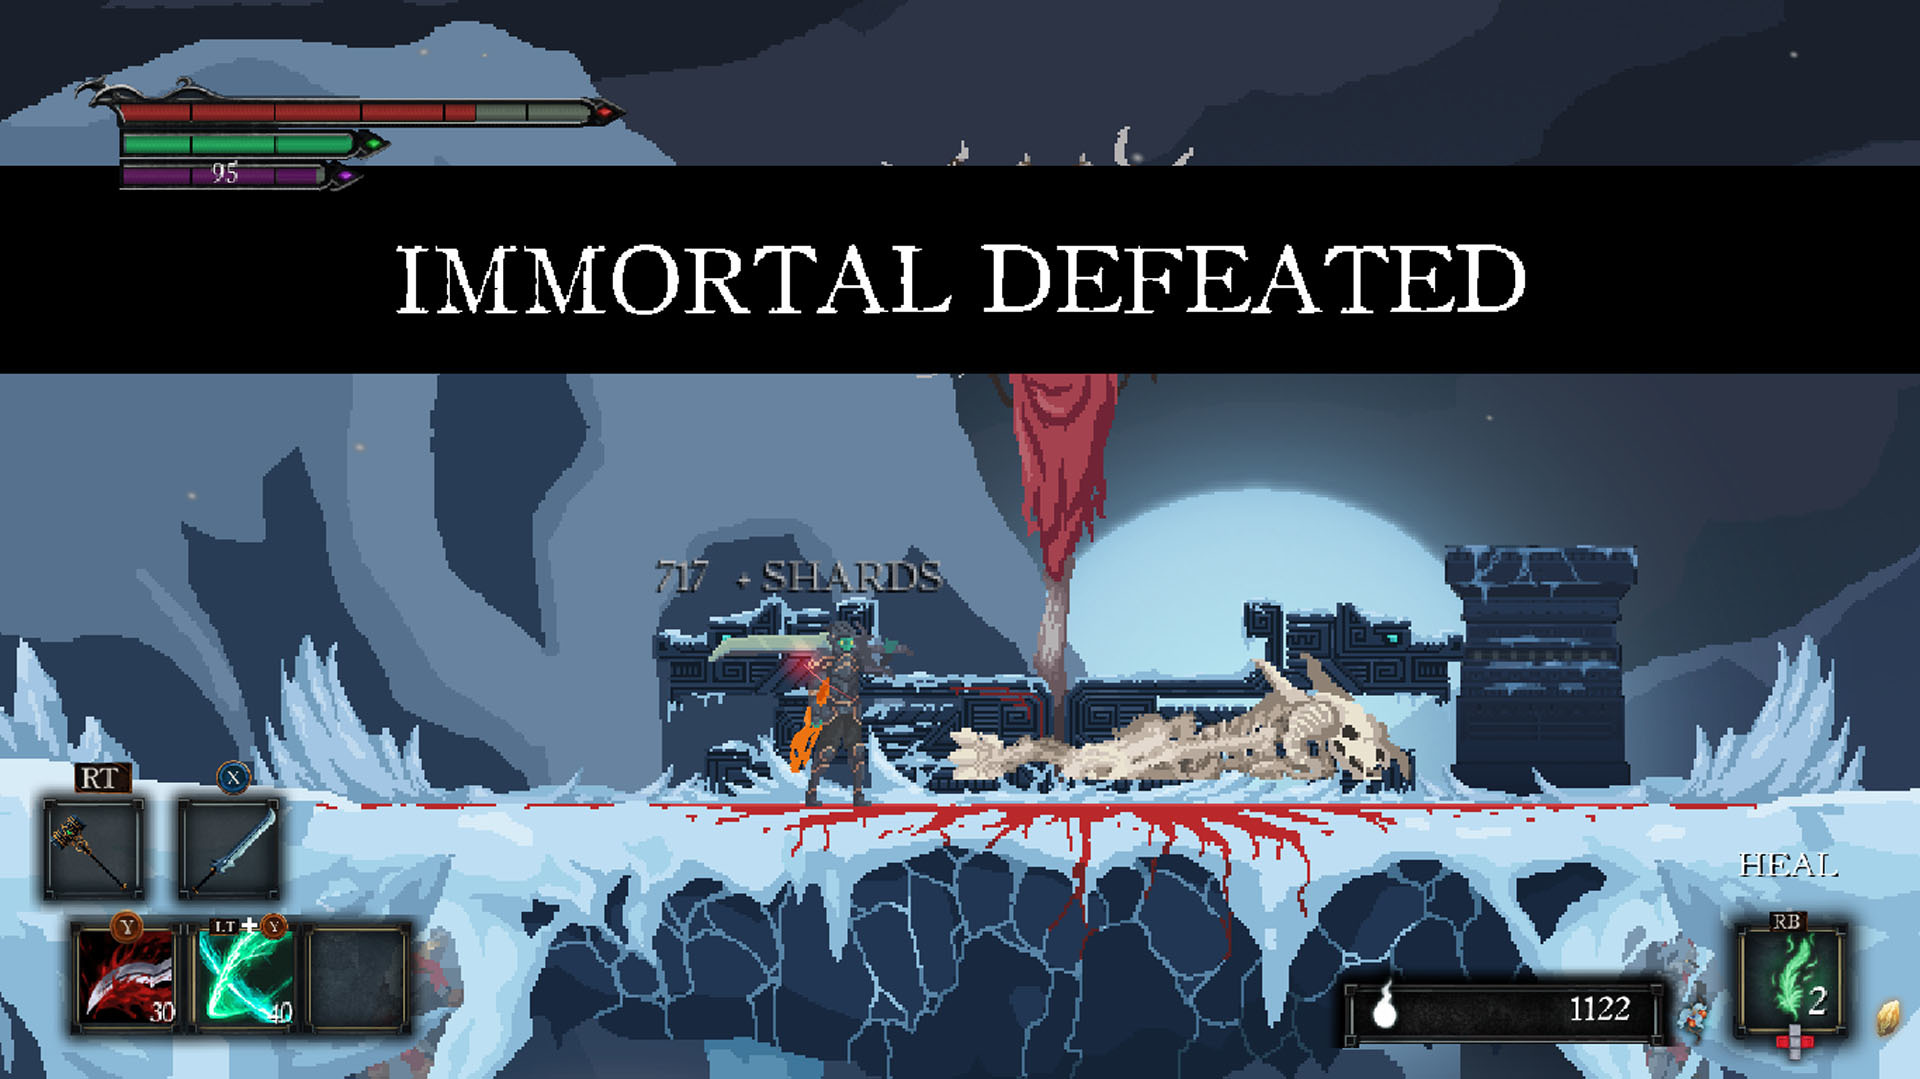 Death's Gambit Review. The Limits of a 2D Souls-Like